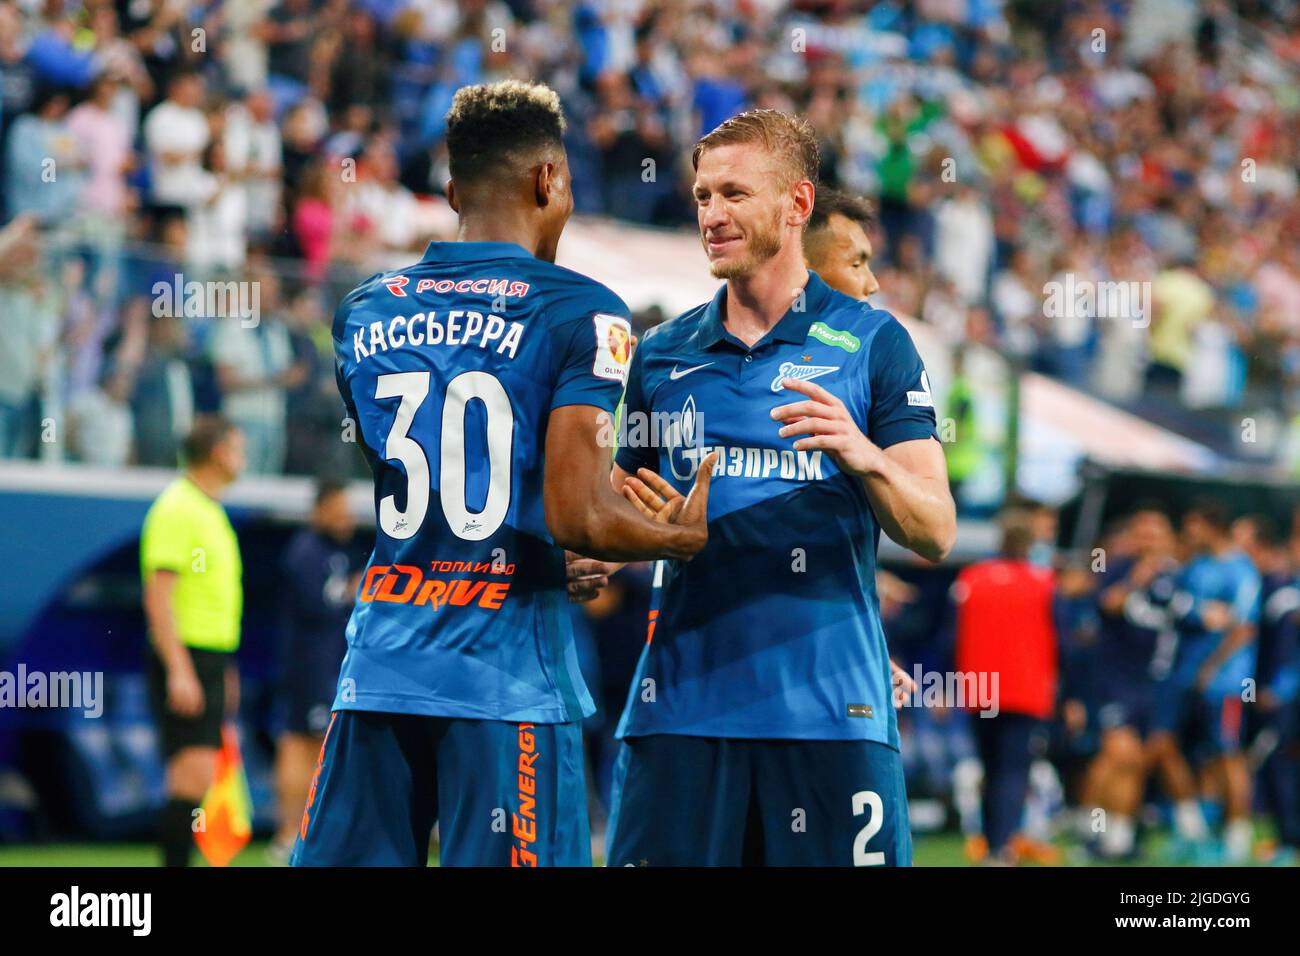 Saint Petersburg, Russia. 09th July, 2022. Zander Mateo Cassierra Cabezas, commonly known as Mateo Cassierra (No.30) and Dmitri Chistyakov (No.2) of Zenit seen during the Olimpbet Russian Football Super Cup football match between Zenit Saint Petersburg and Spartak Moscow at Gazprom Arena. Final score; Zenit 4:0 Spartak. (Photo by Maksim Konstantinov/SOPA Images/Sipa USA) Credit: Sipa USA/Alamy Live News Stock Photo